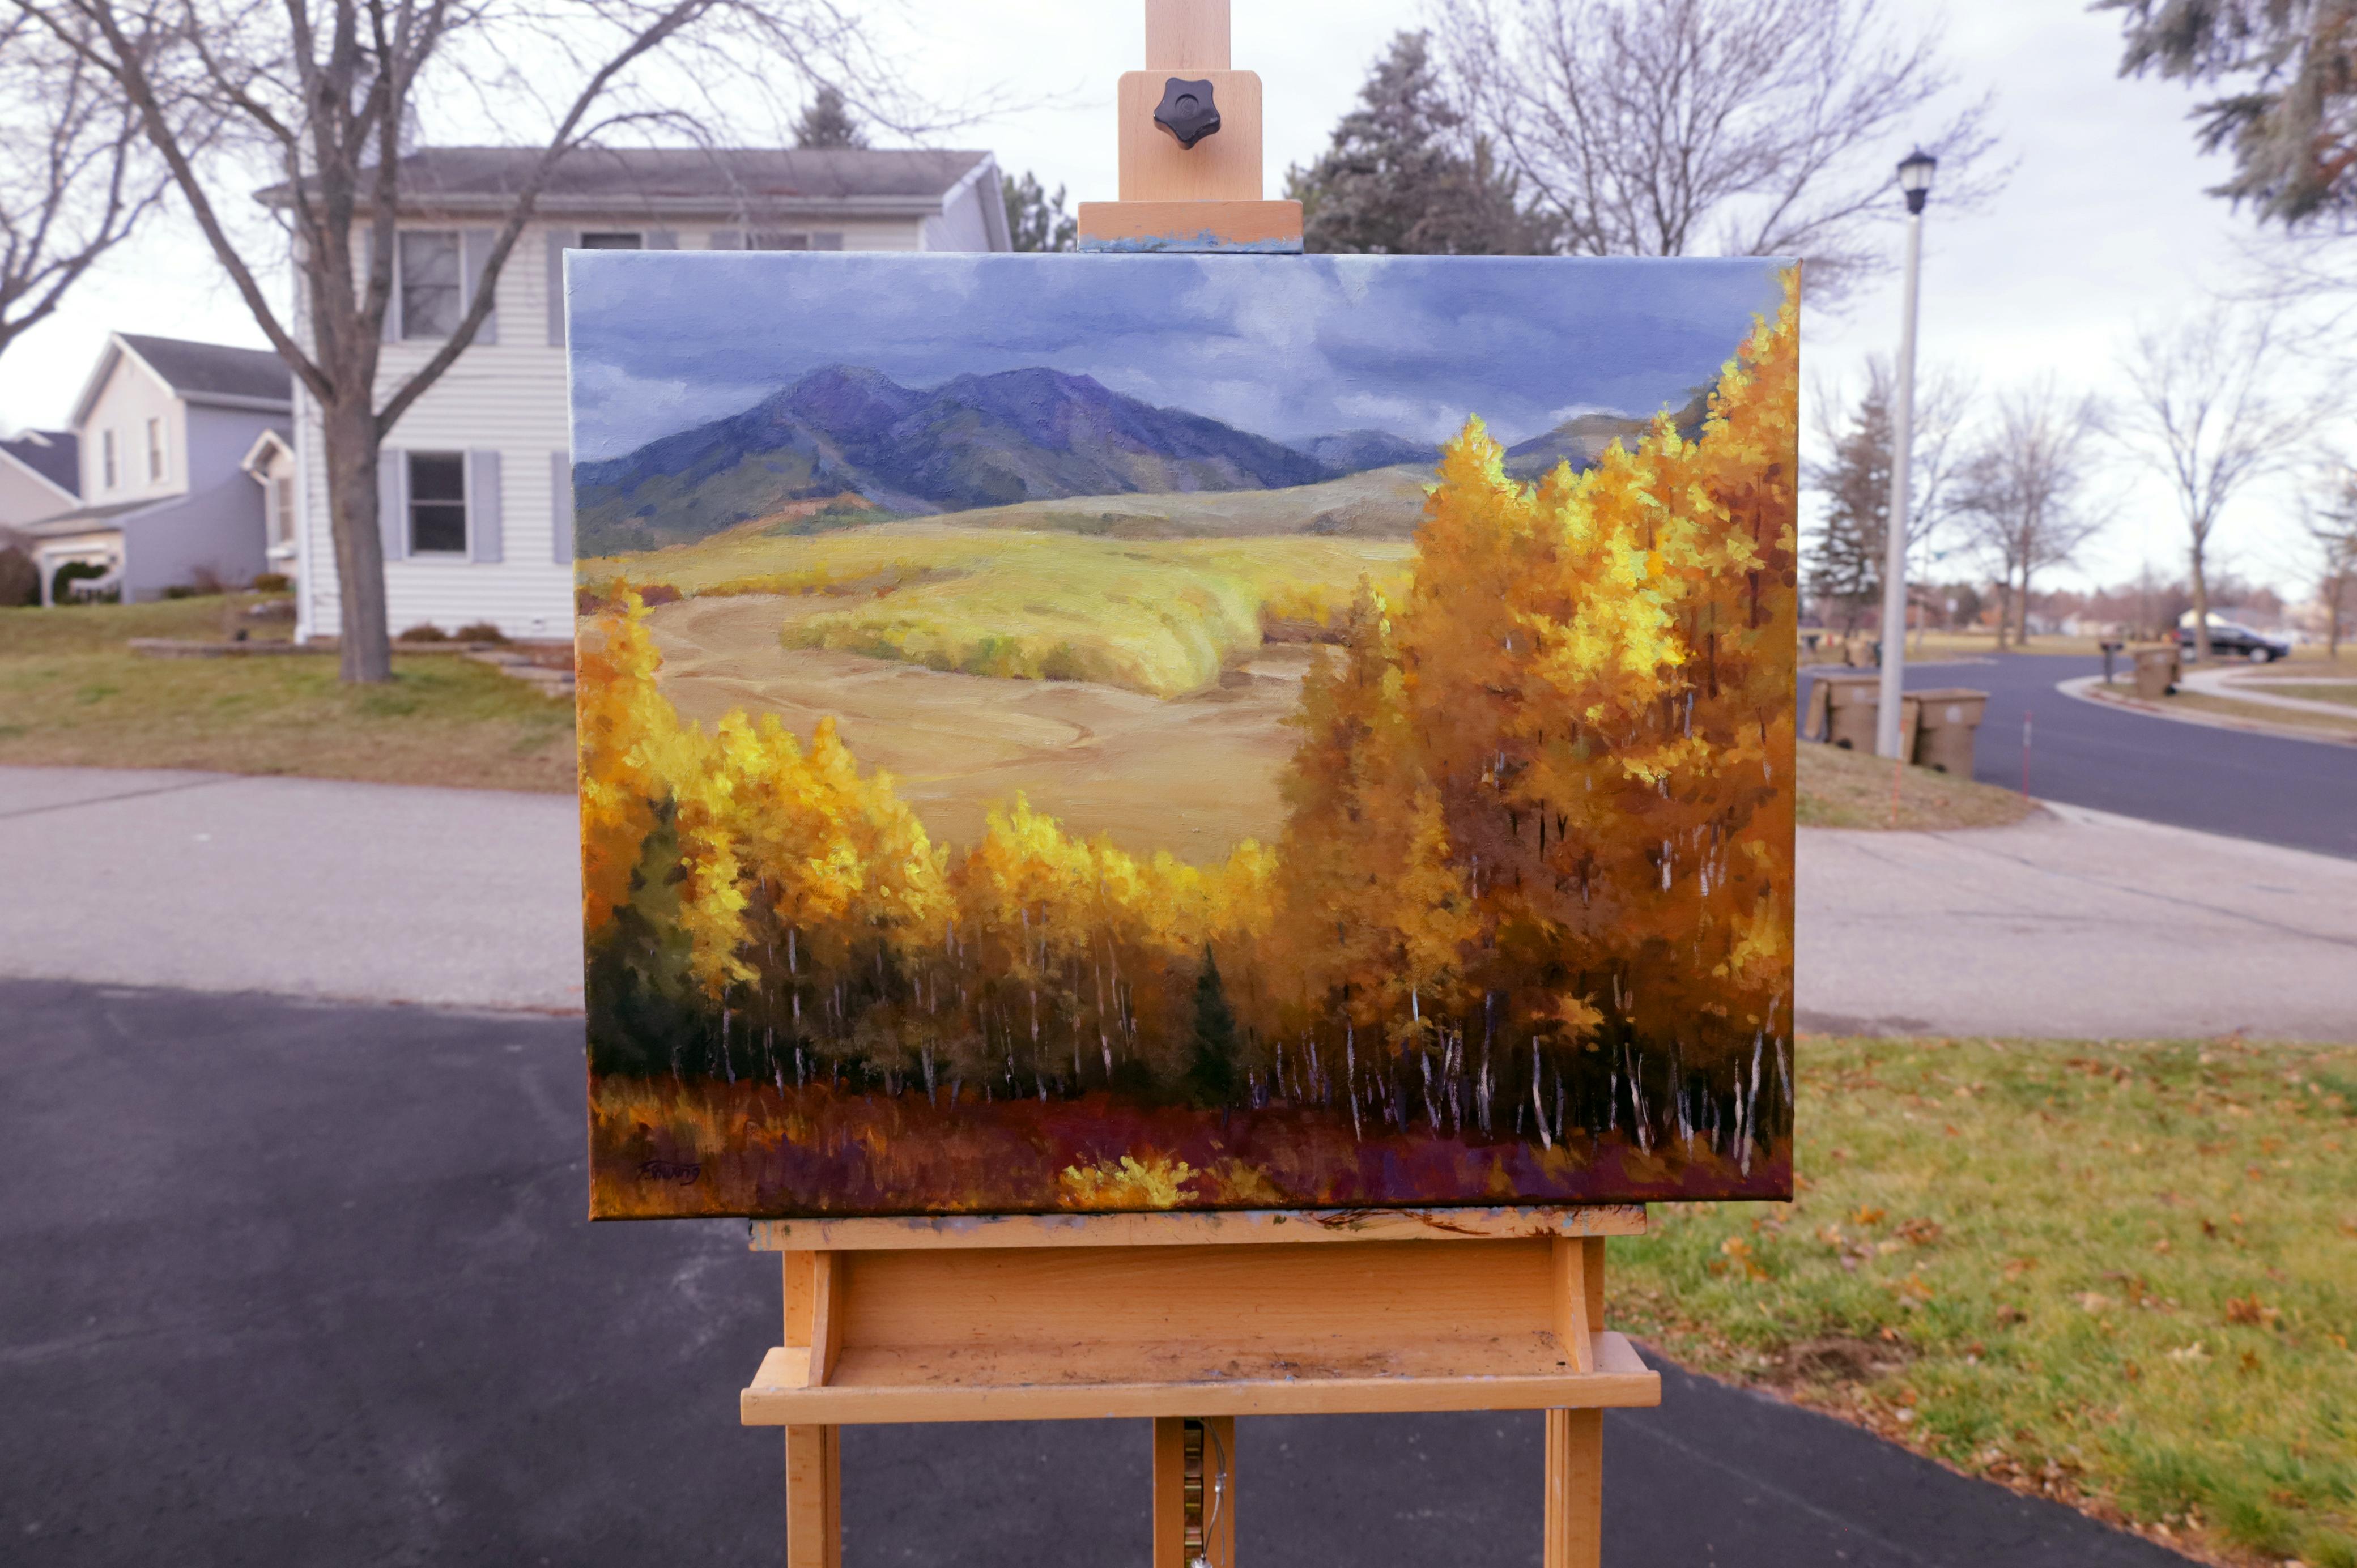 <p>Artist Comments<br>Golden foliage blankets the forest in this autumn landscape. The vast meadow in the distance echoes the seasonal transition. With the sun hidden behind drifting clouds, the scene is infused with a touch of softness and